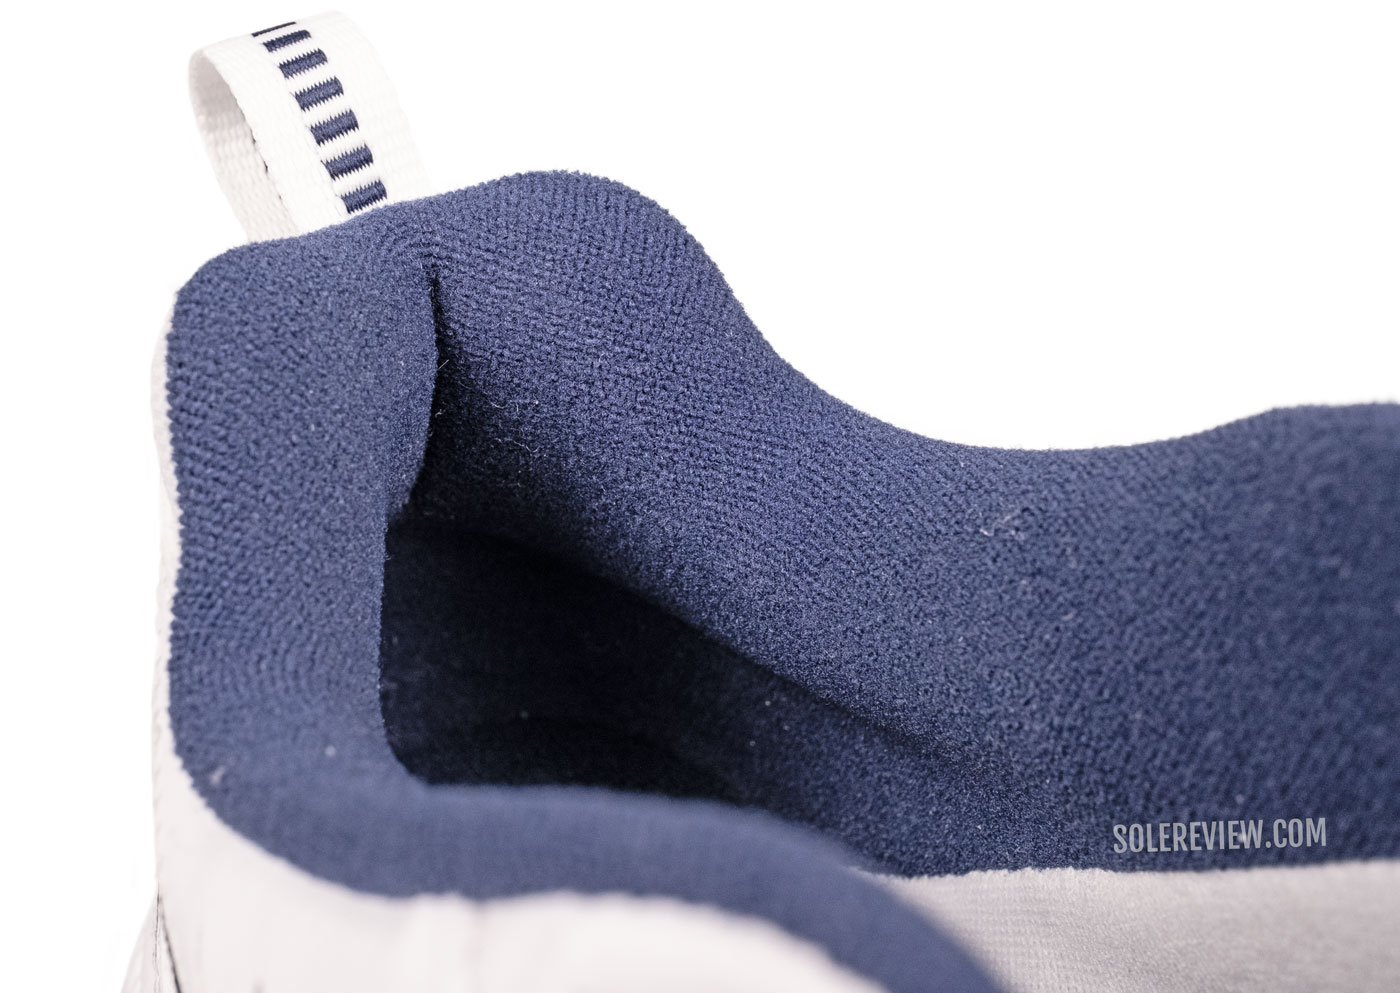 The heel collar of the Nike Monarch IV.